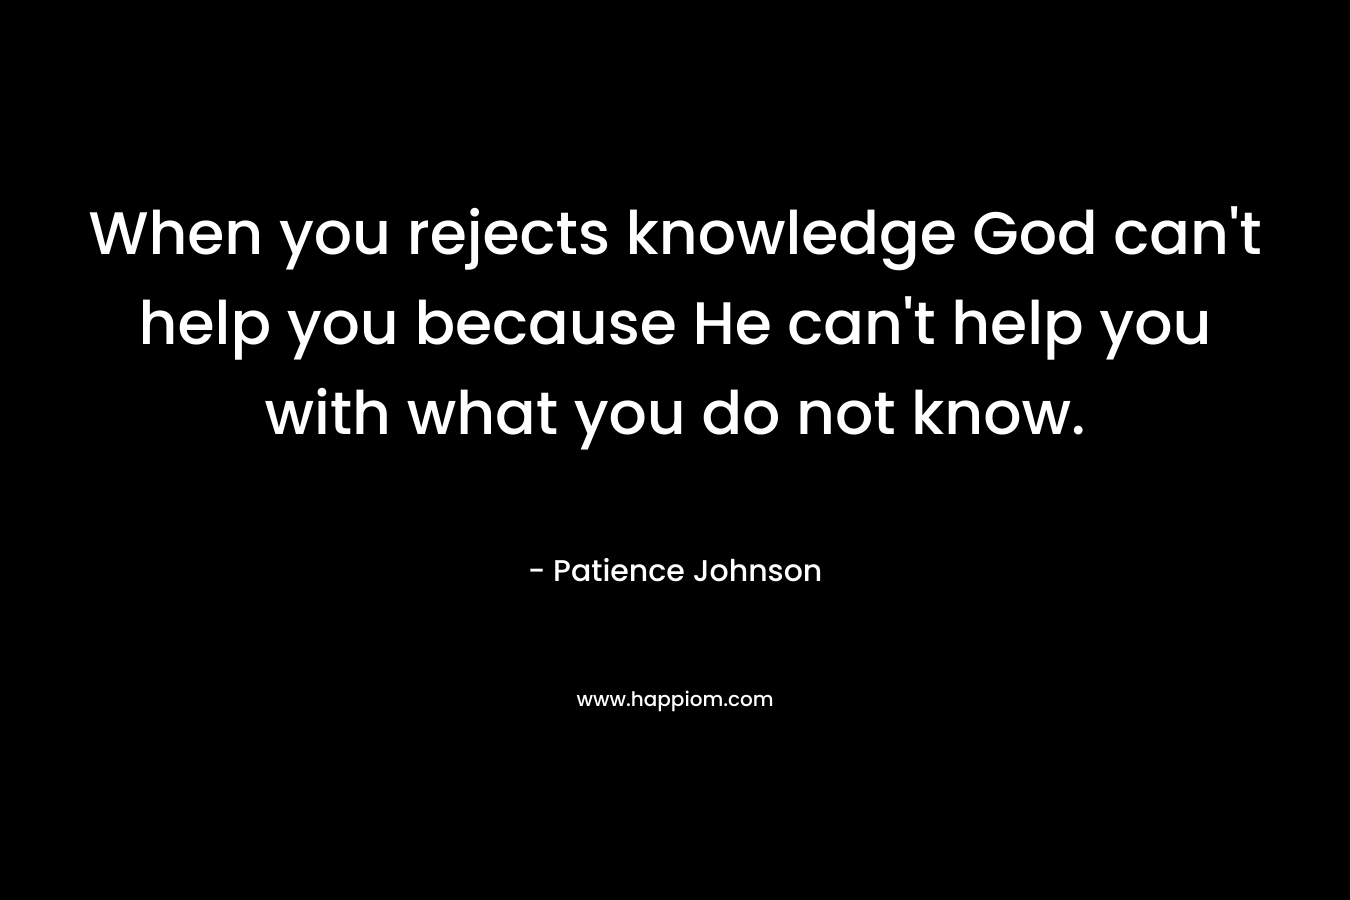 When you rejects knowledge God can't help you because He can't help you with what you do not know.